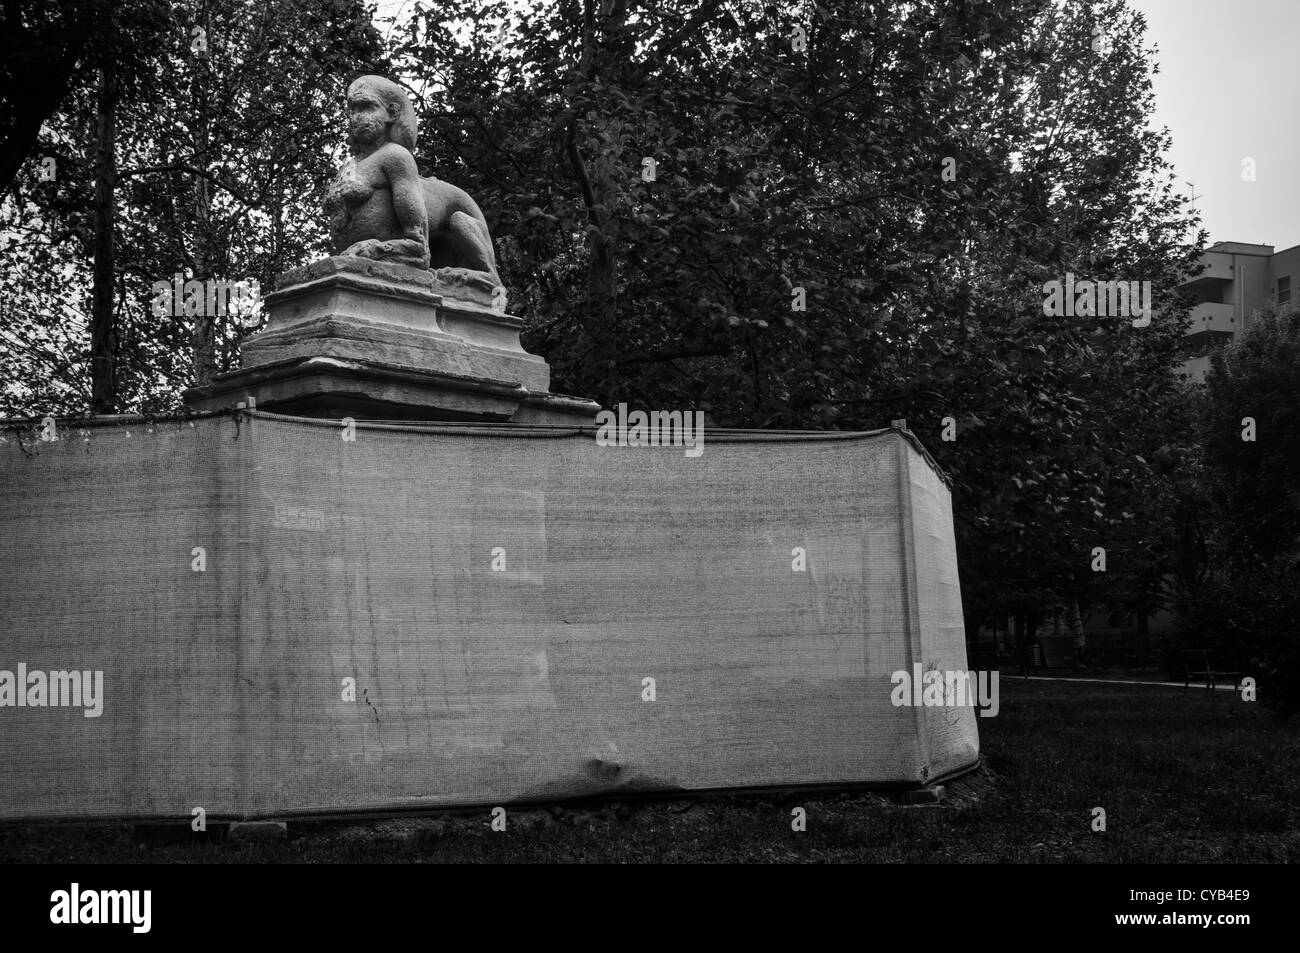 Milan, Italy. Sphinx statue in a public park Stock Photo